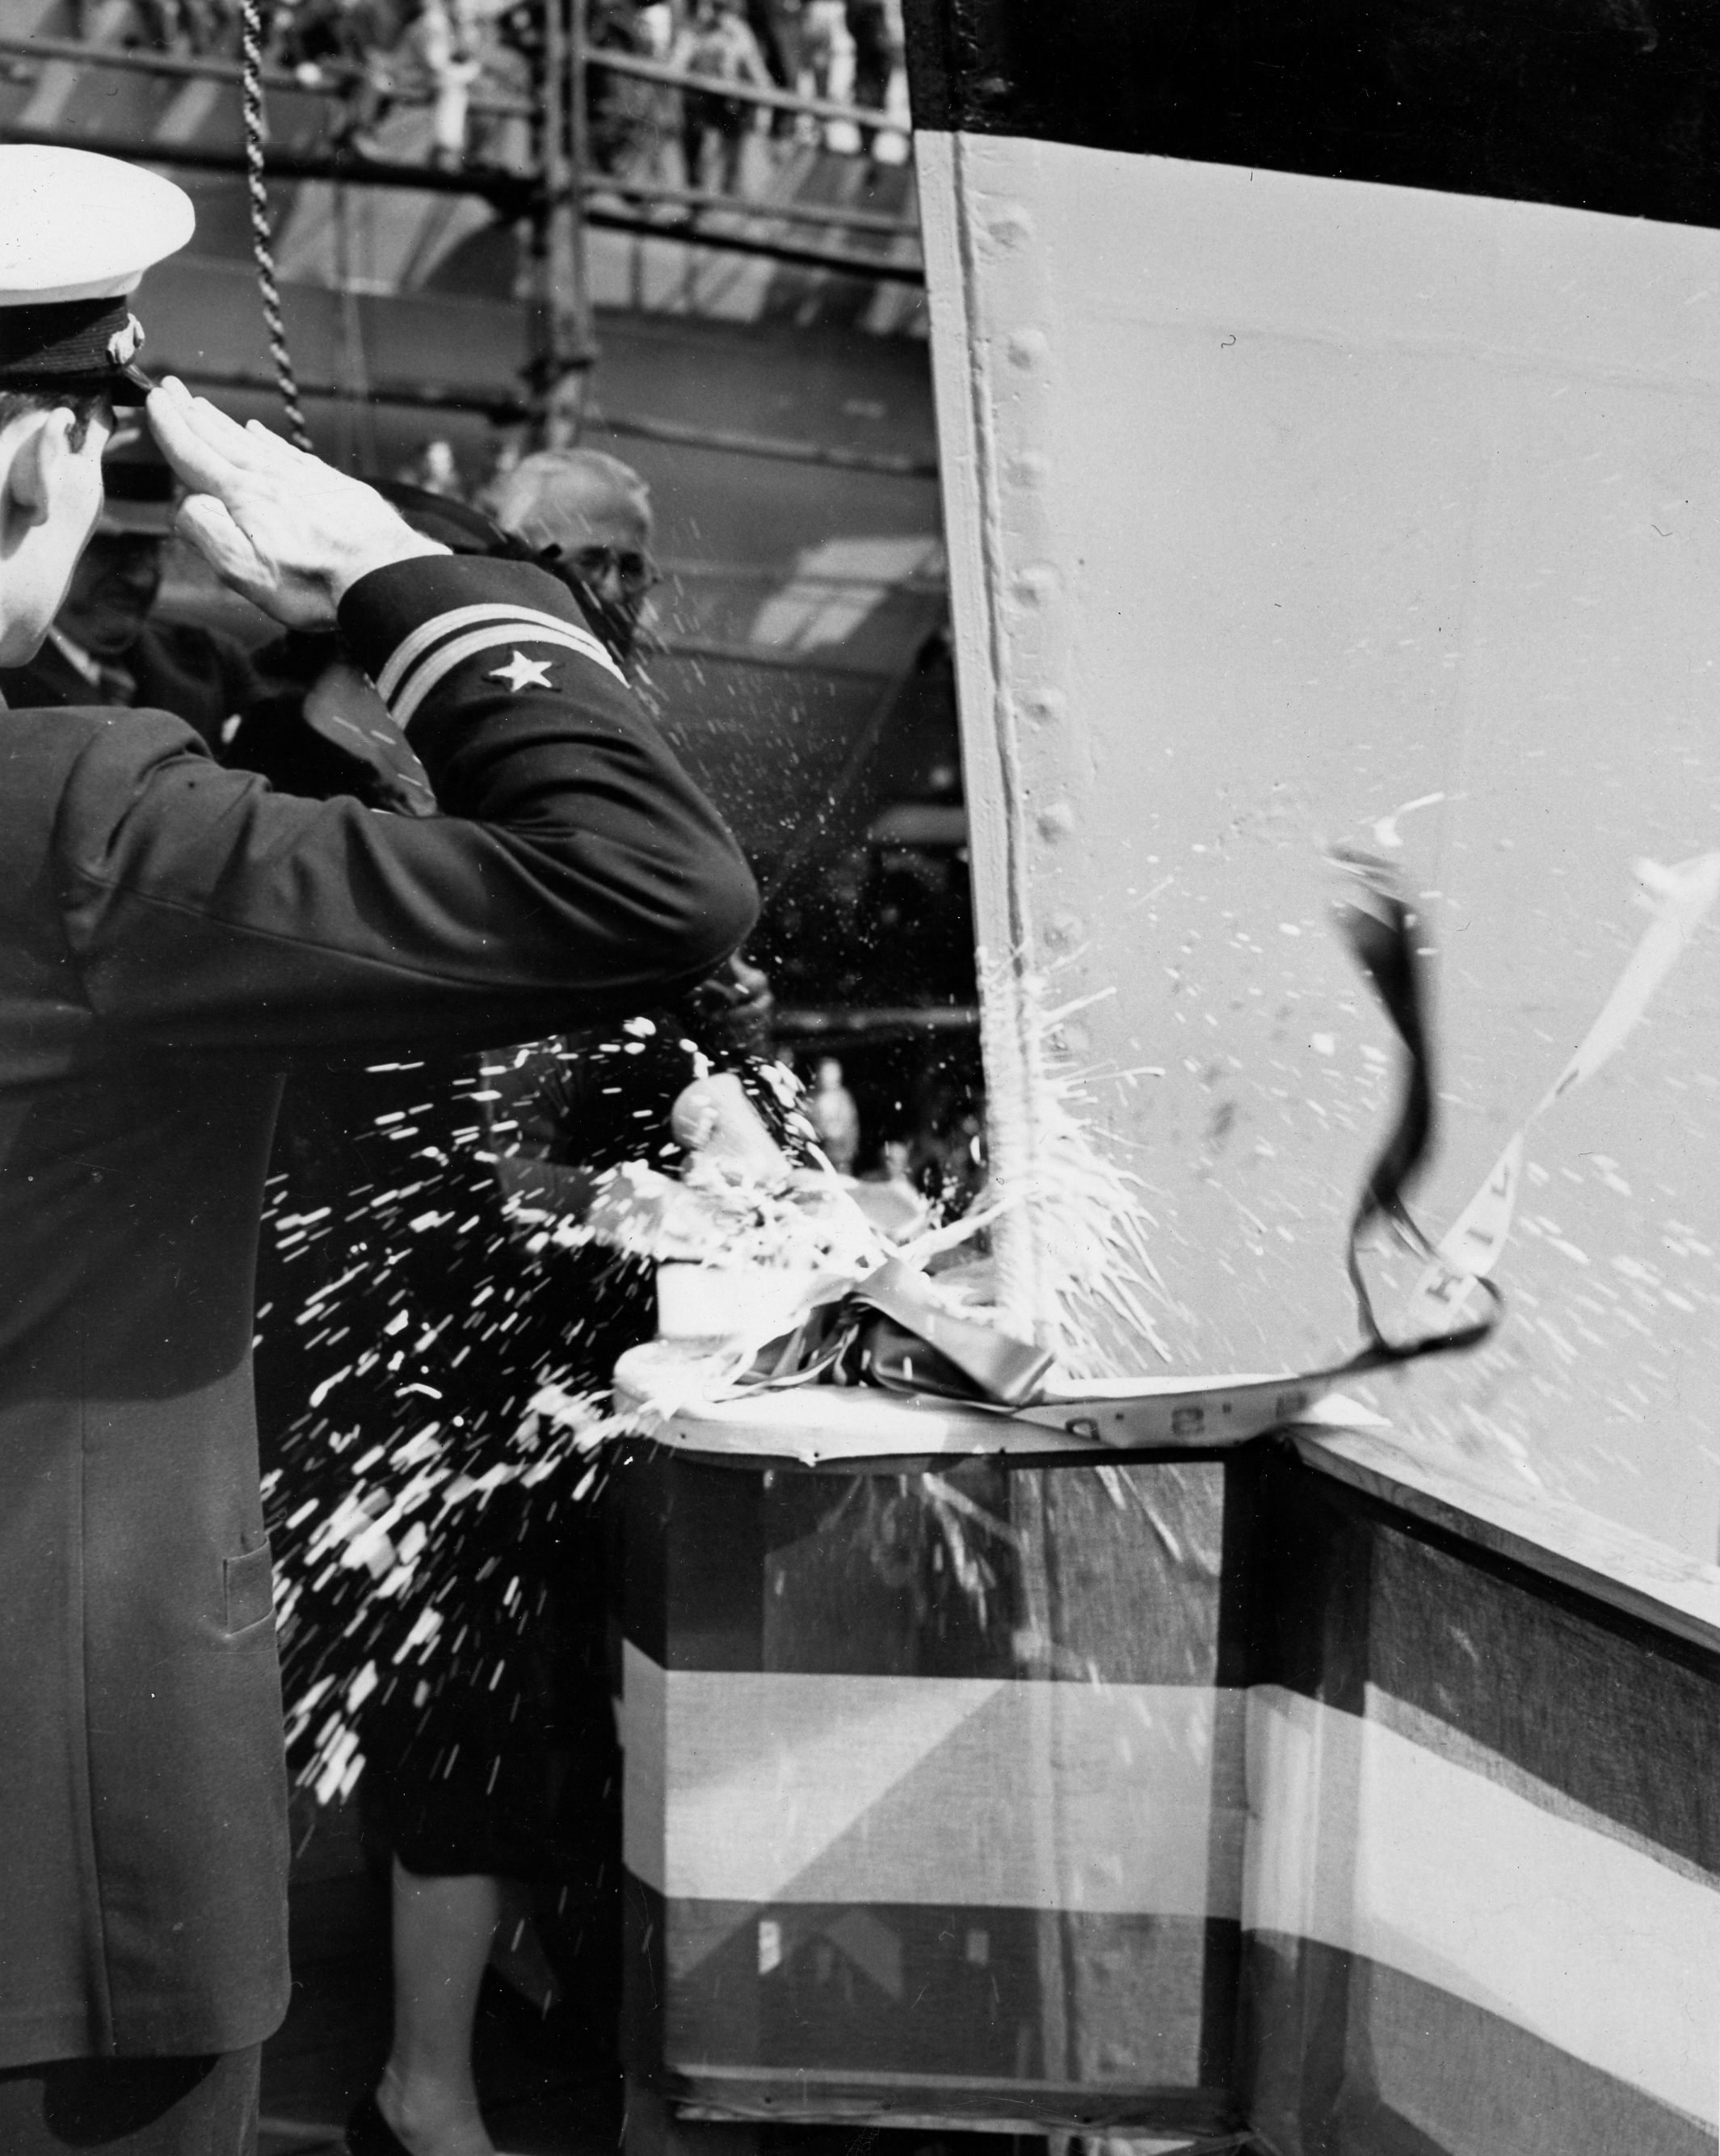 Christening of battleship New Jersey by Carolyn Edison, wife of New Jersey Governor and former Secretary of the Navy Charles Edison, Philadelphia Navy Yard, Pennsylvania, United States, 7 Dec 1942